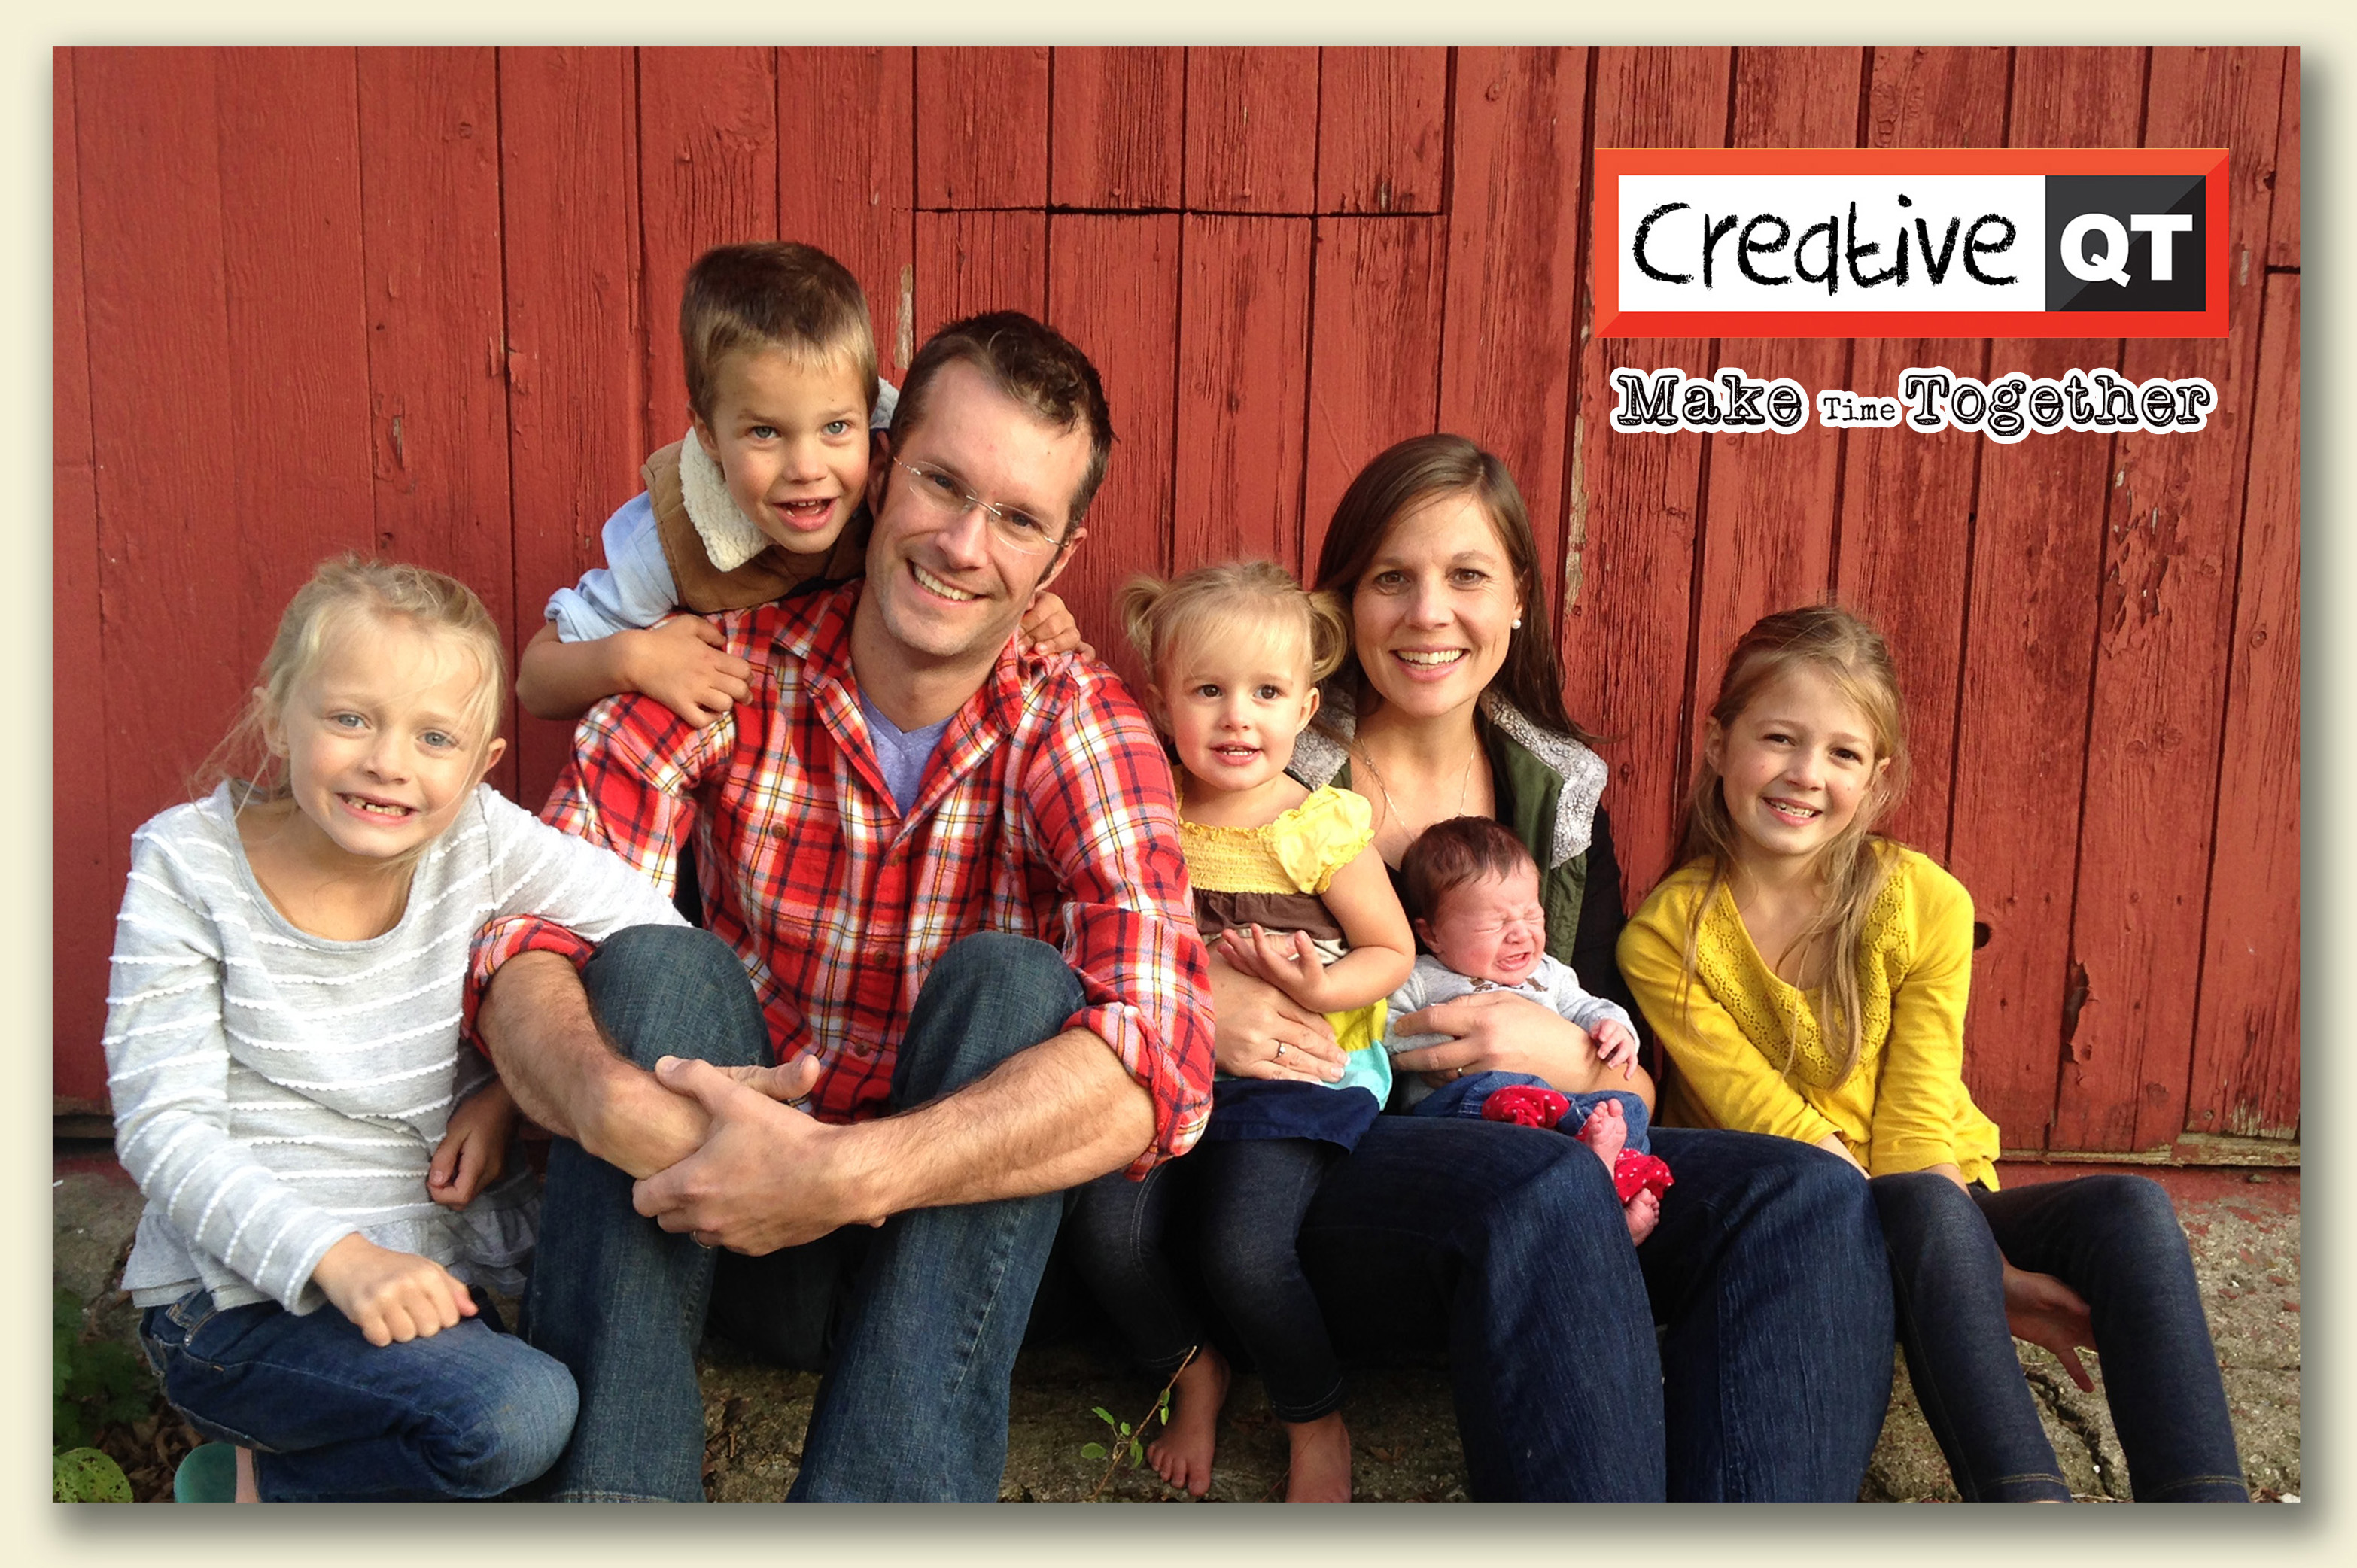 Husband and wife team and parents of 5, Adam and Dana Sue Hinkle founded Creative QT to help busy parents succeed.